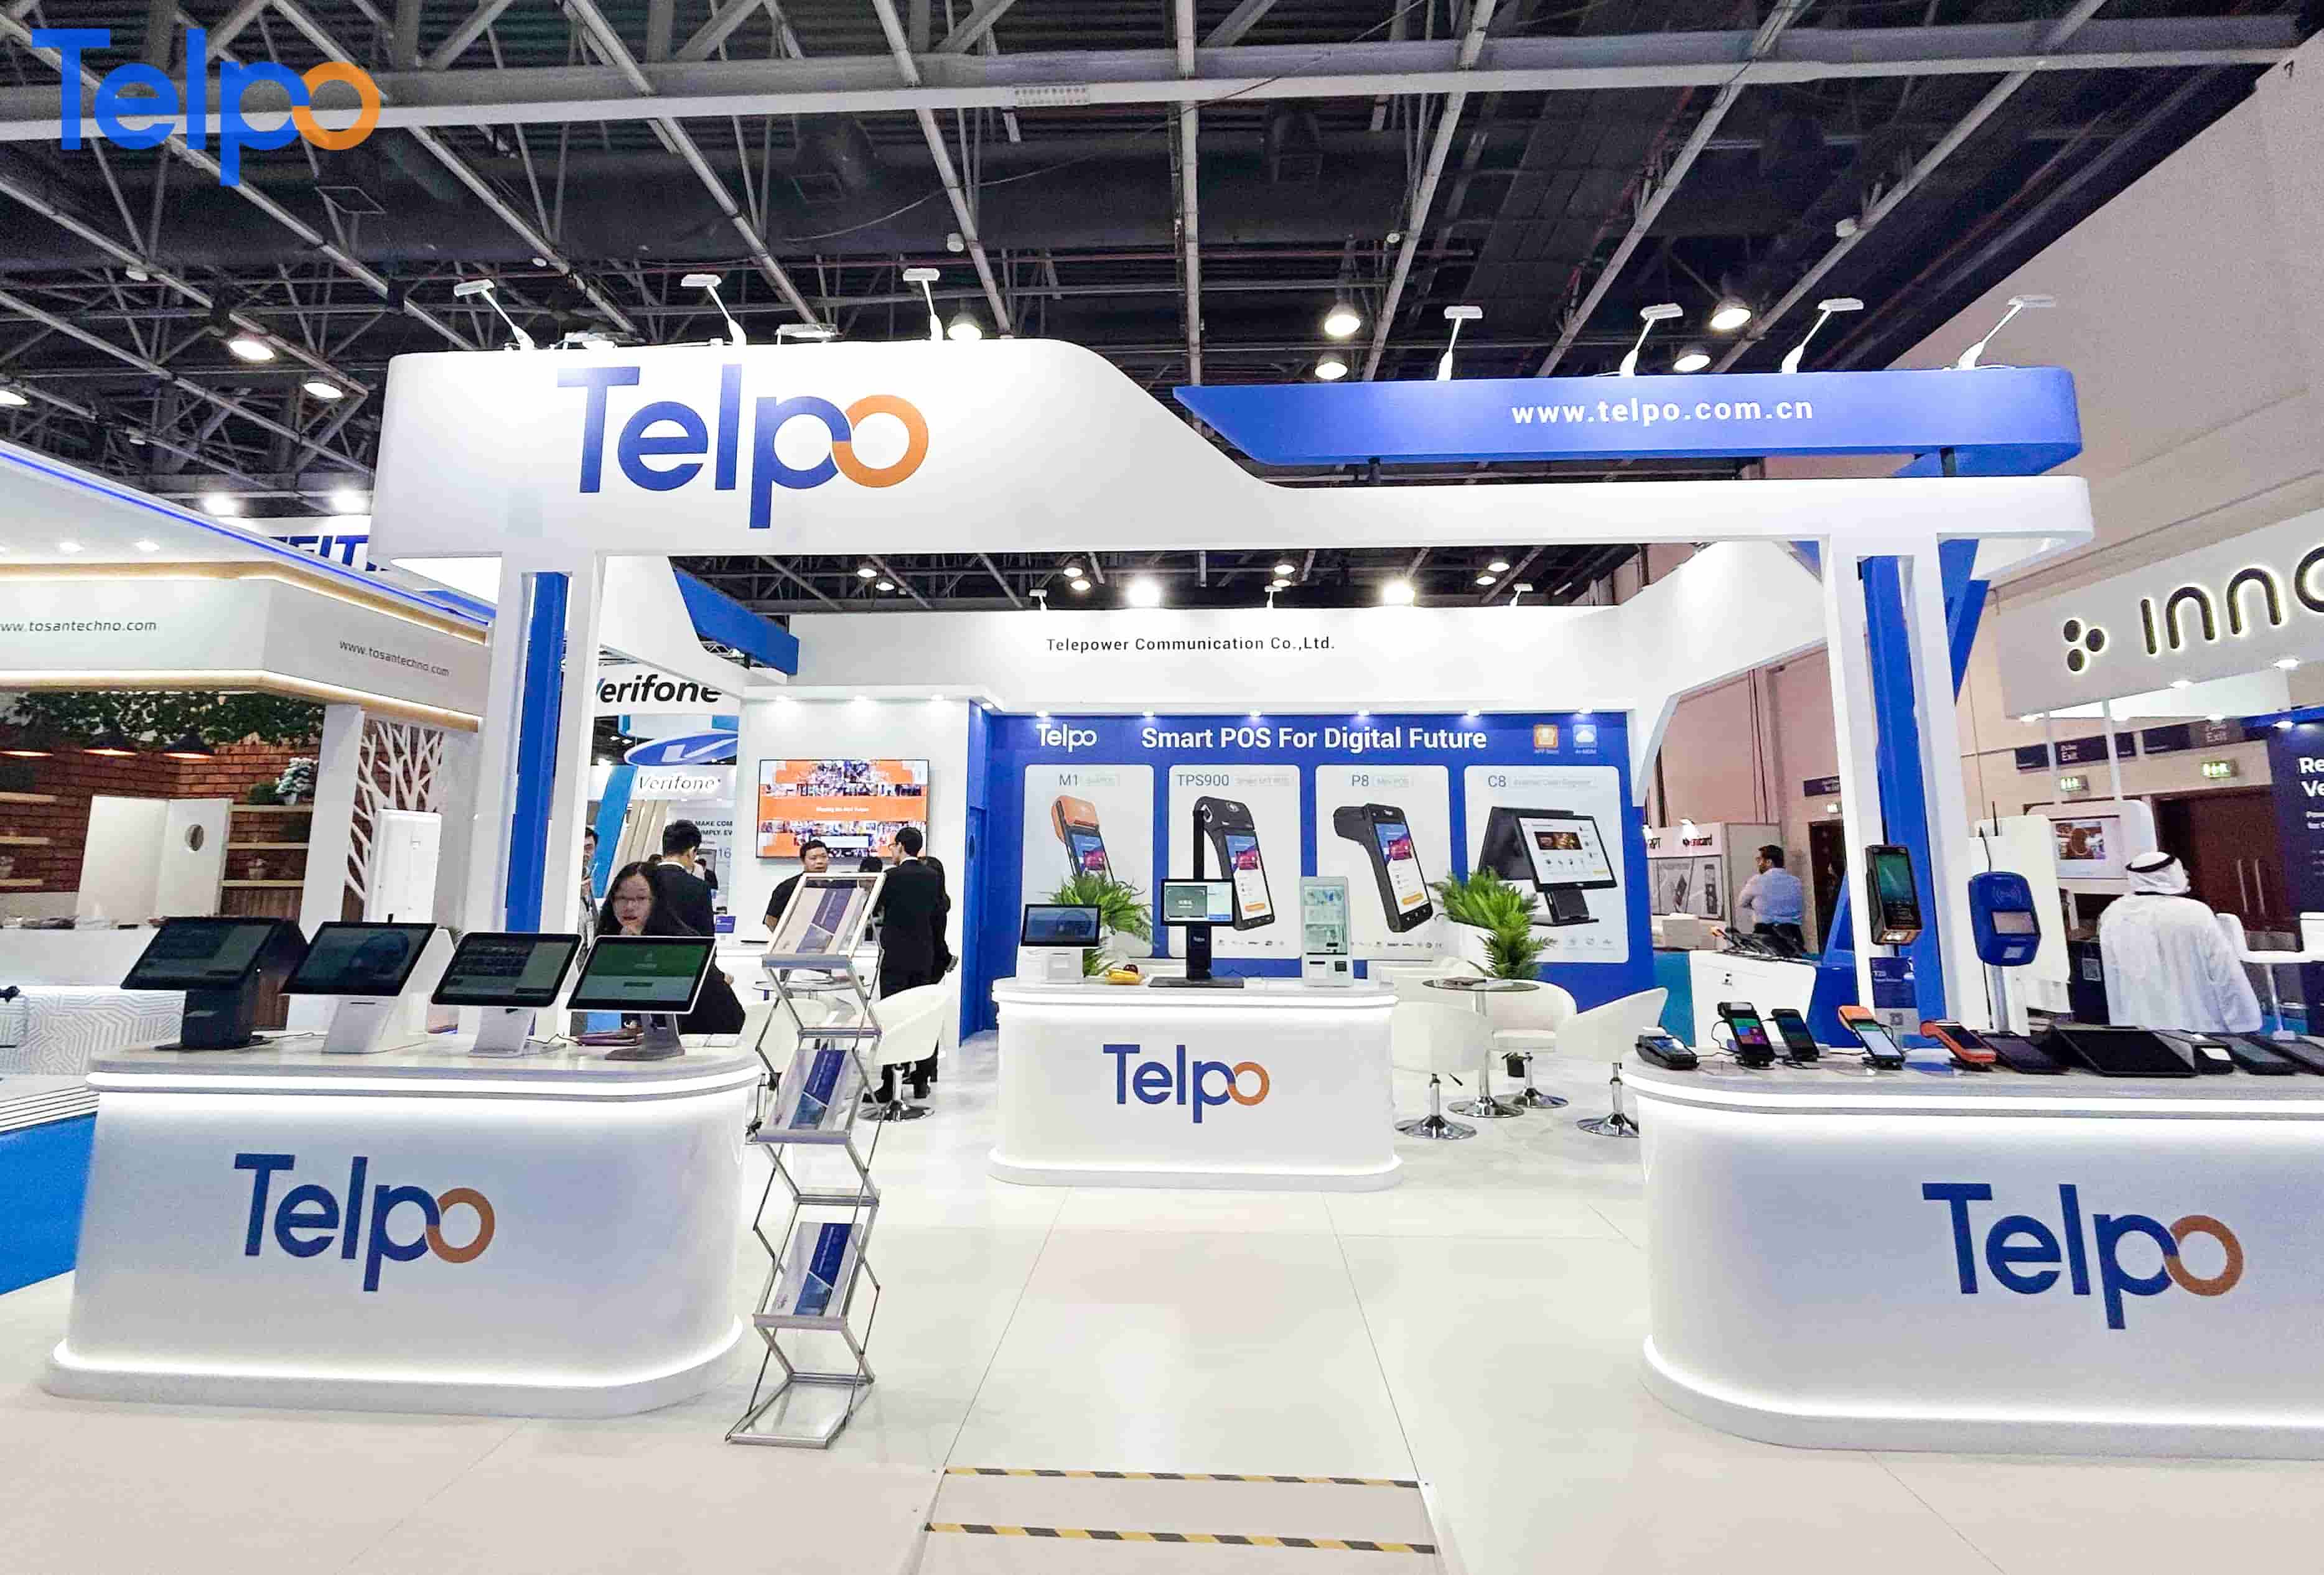 Telpo displayed a variety of smart POS terminals